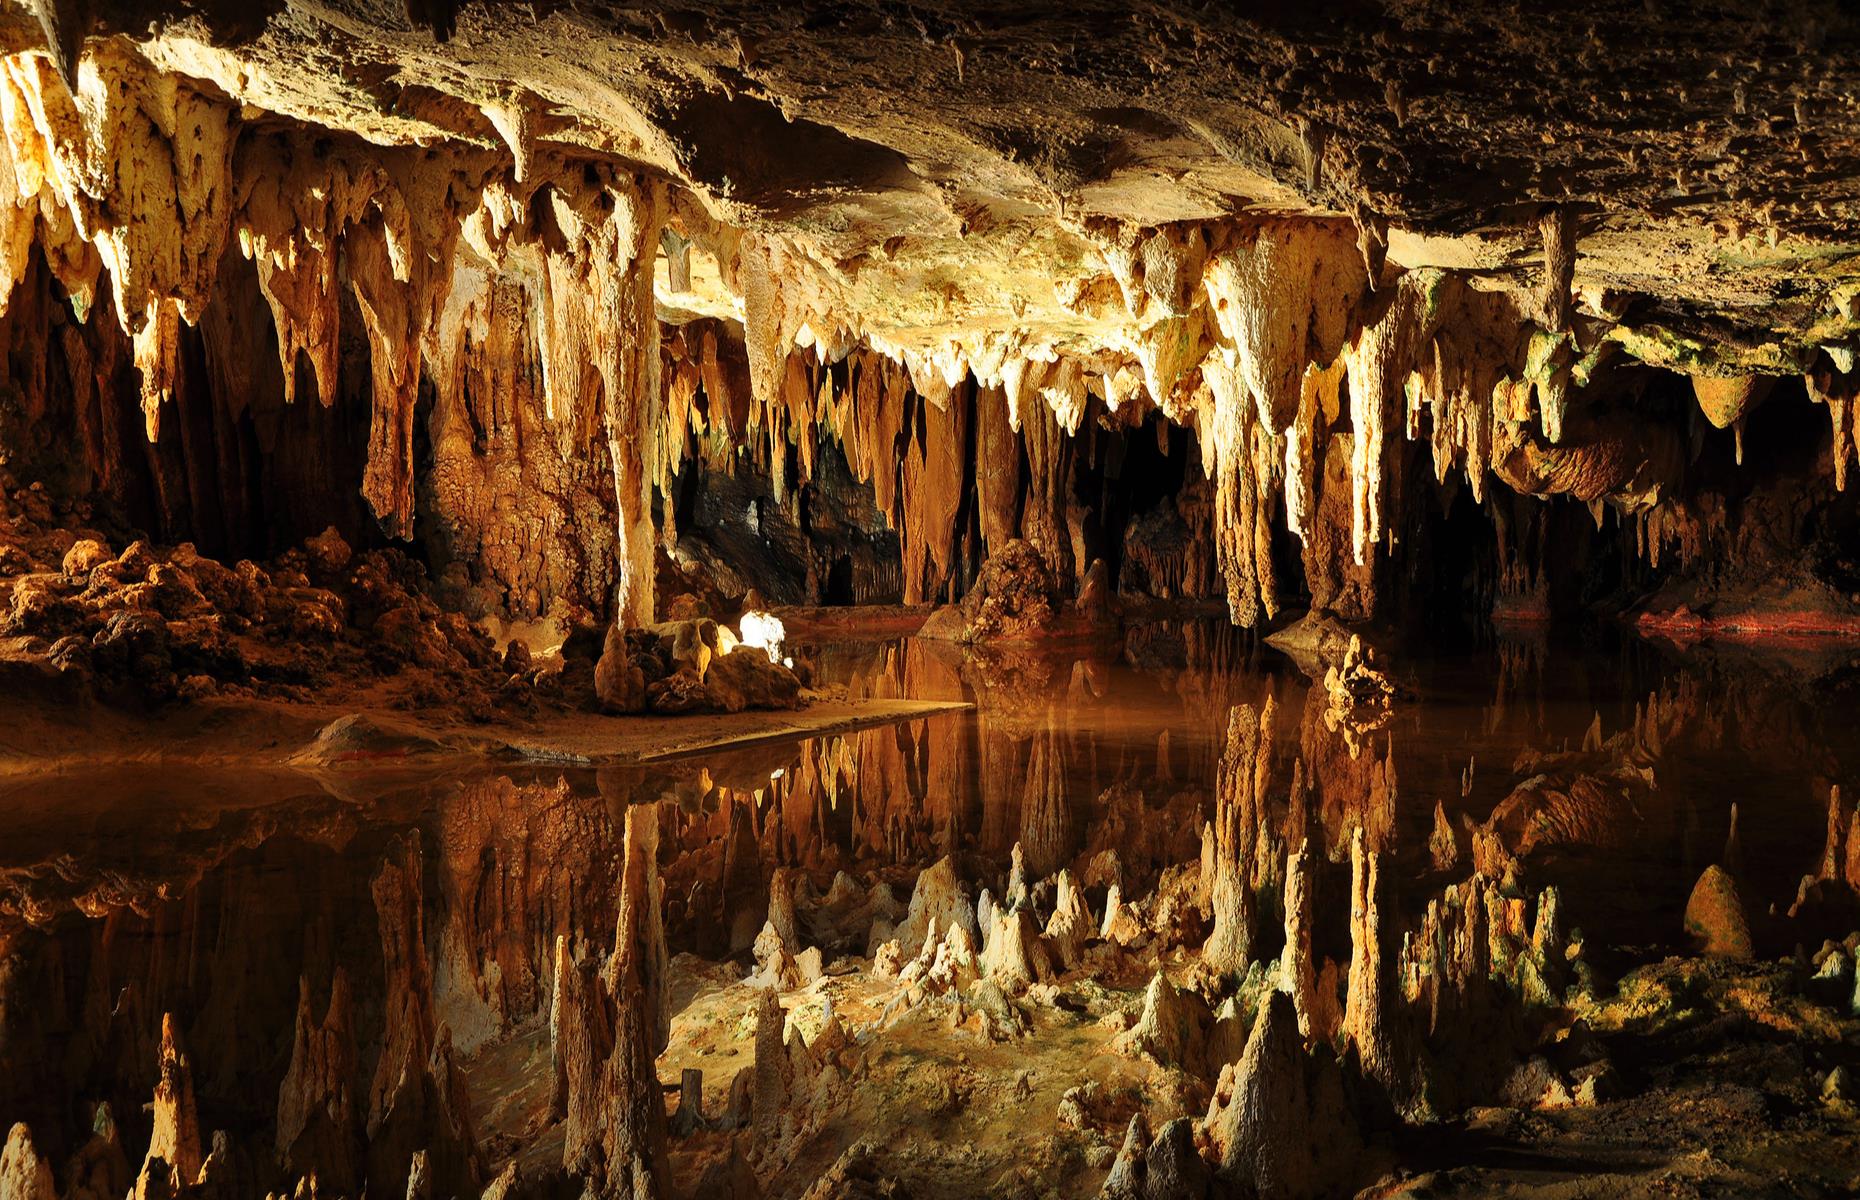 <p>Buried on the fringes of Shenandoah National Park, <a href="https://luraycaverns.com/">Luray Caverns</a> is hard to beat for its staggering scale. You’ll find epic chambers with ceilings over 10 stories high, as well as crystalline pools such as Dream Lake, which has a surface so glassy it perfectly mirrors the stalactites above. There’s also the legendary Great Stalacpipe Organ, which can play Beethoven's Moonlight Sonata by using rubber mallets to strike 37 stalactites of varying sizes.</p>